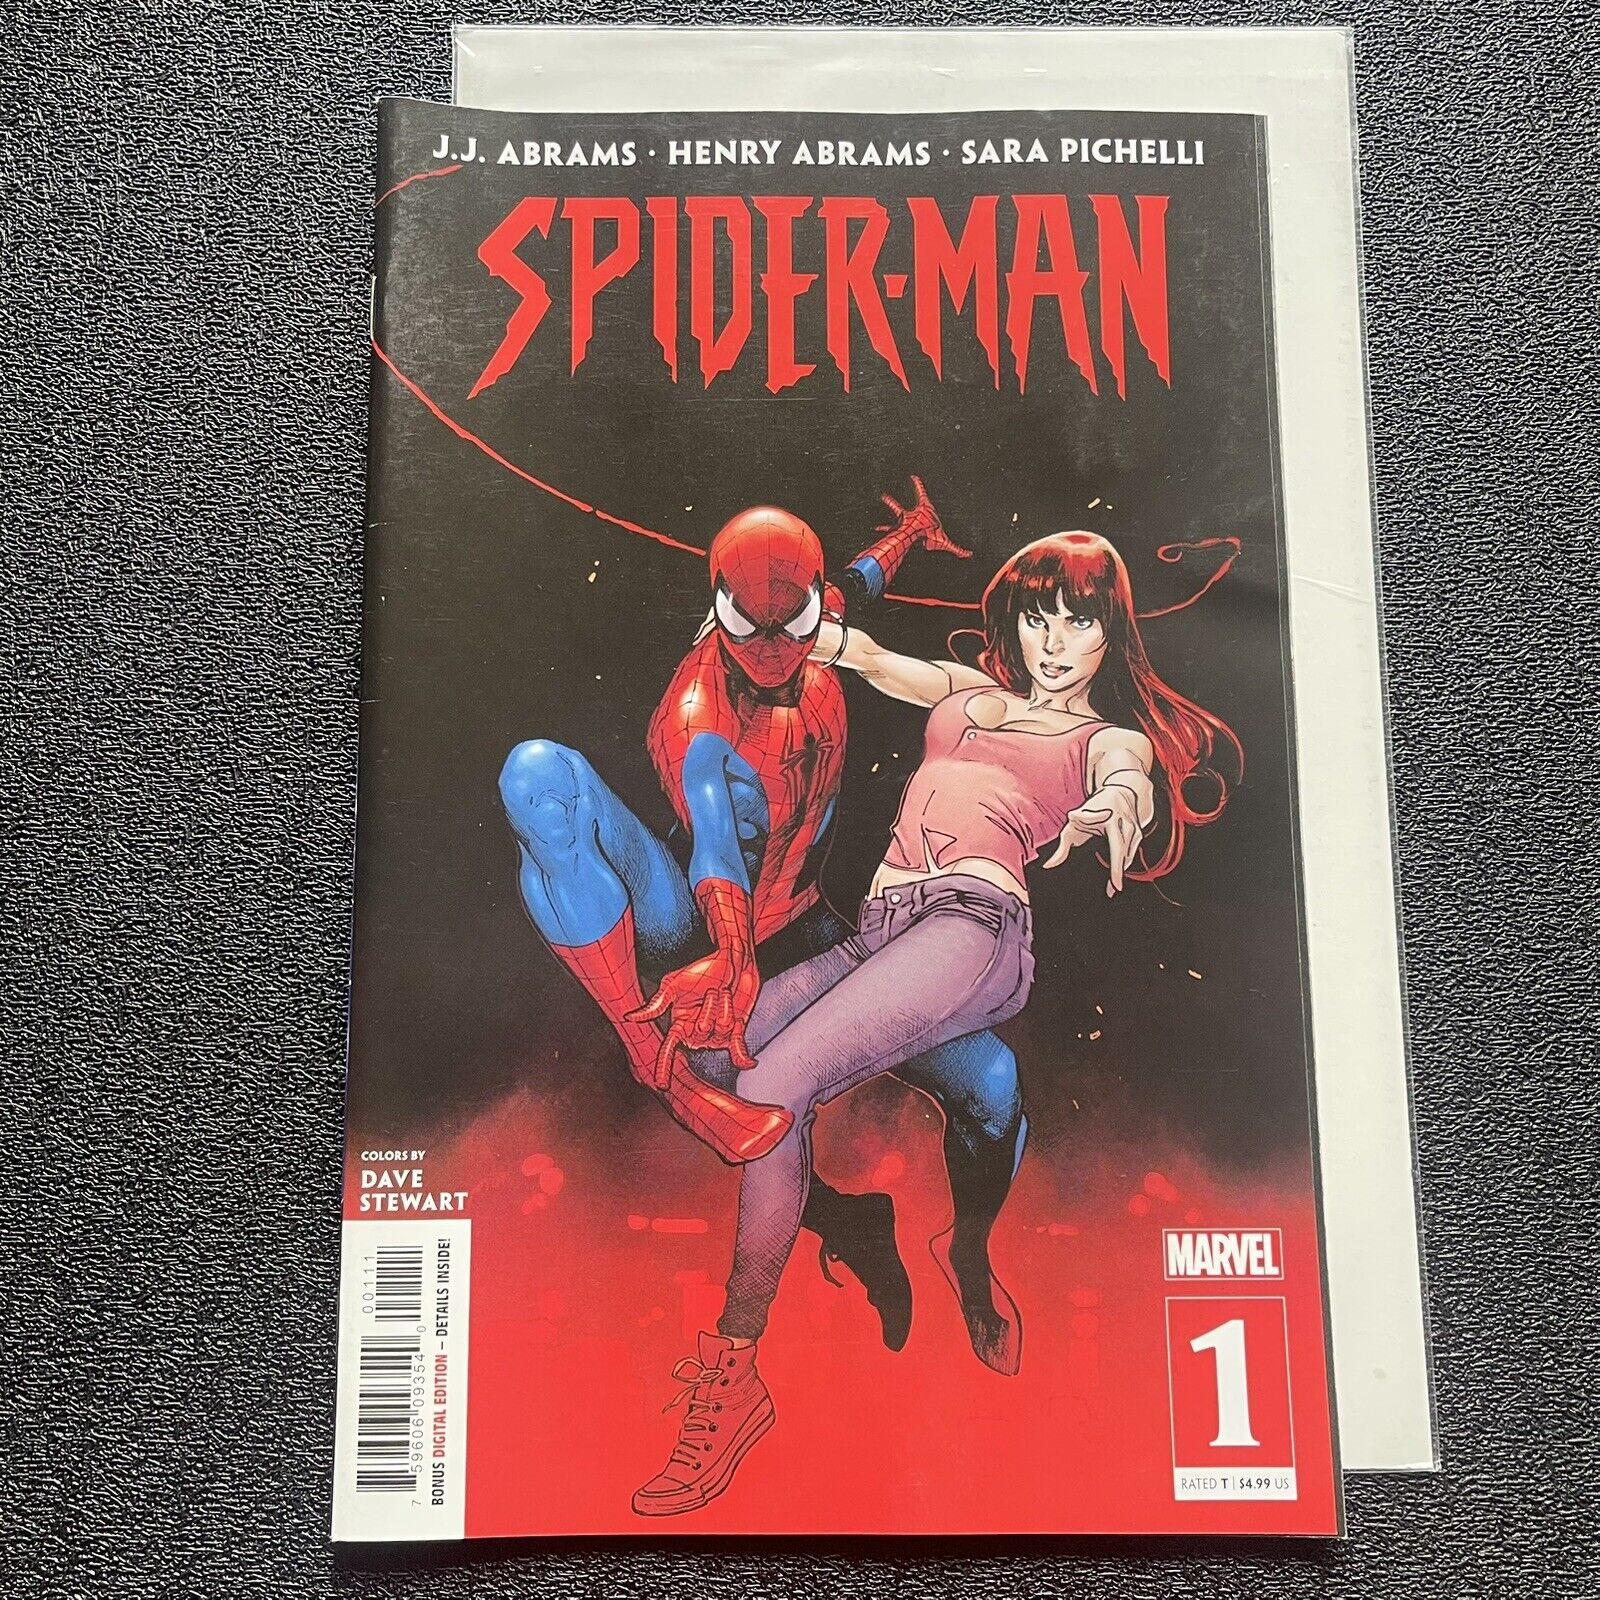 Spider-Man (2019) Issue #1; Used/Very Good Condition